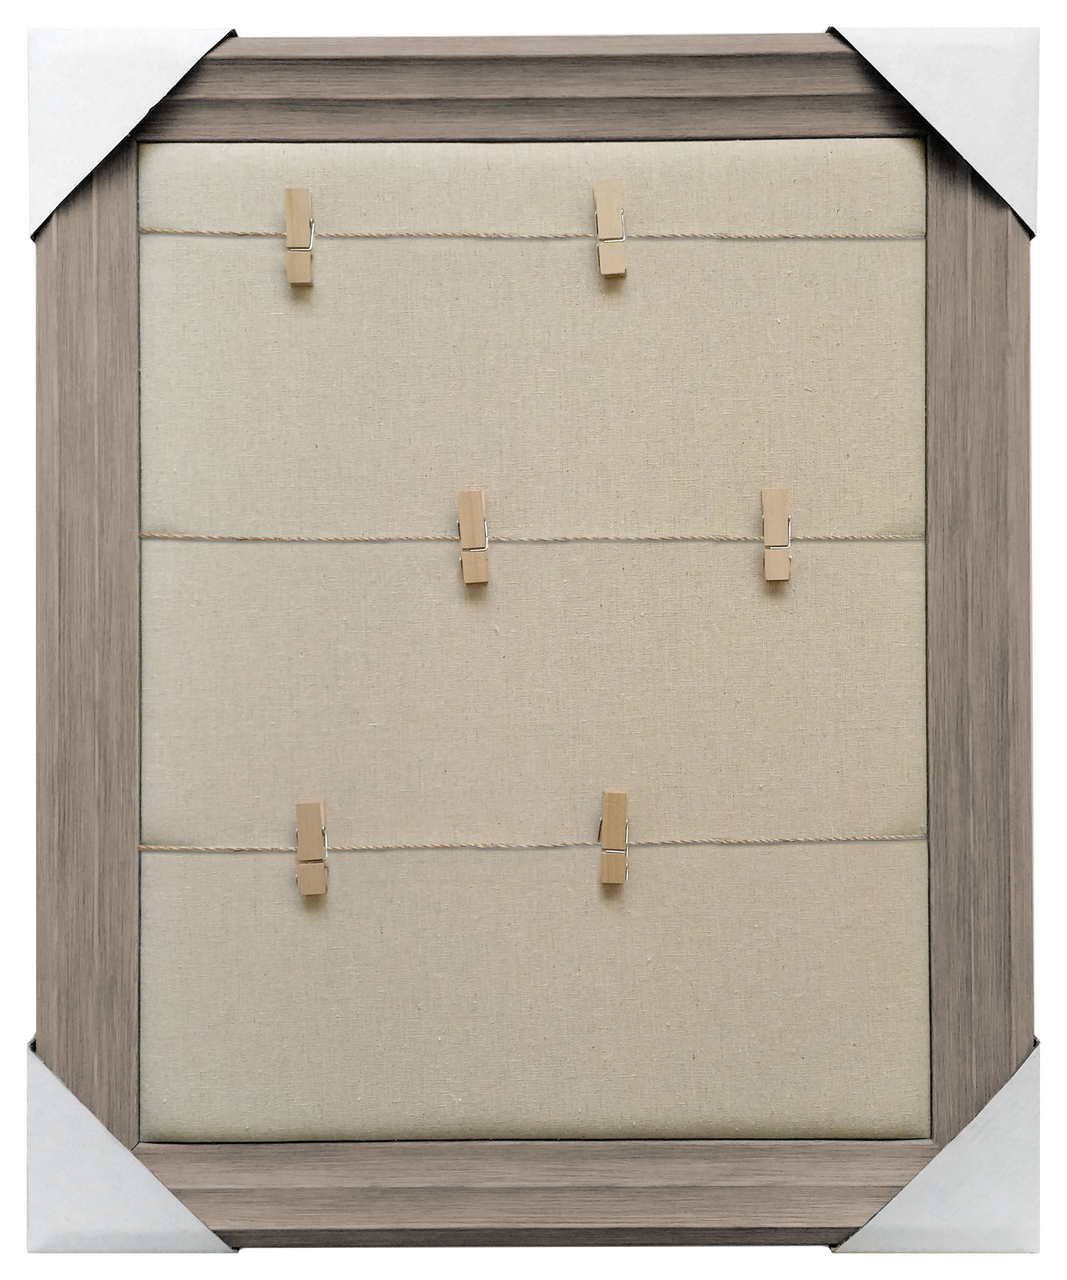 19x23 Framed Memo Board, Clothespins with twine over plain fabric, Light Brown frame